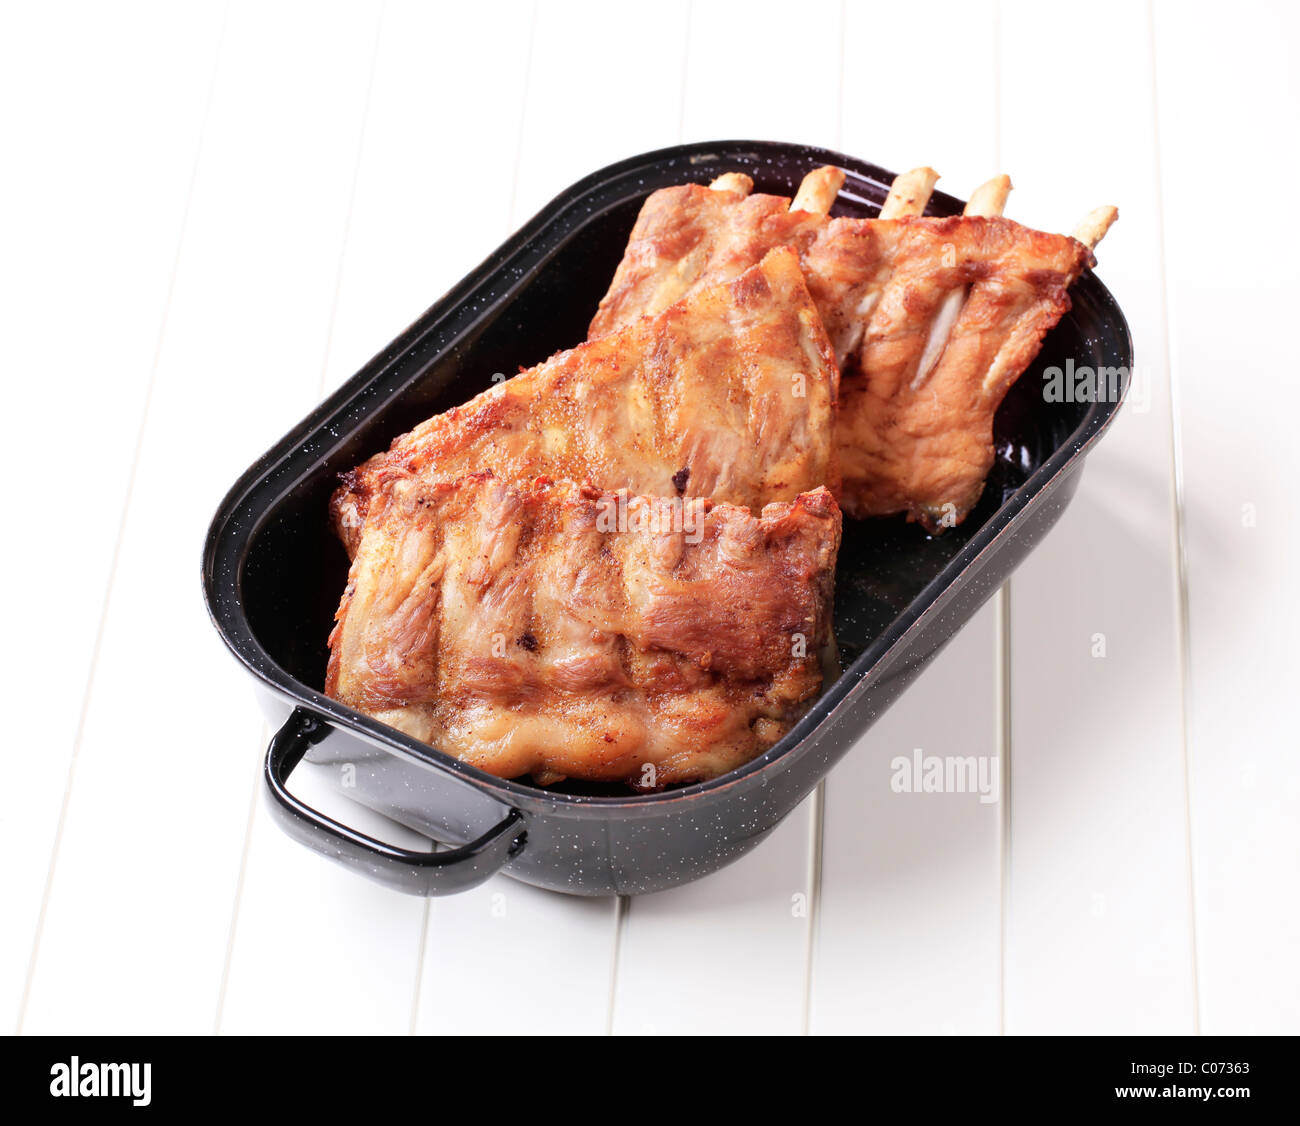 Oven-roasted rack of pork ribs in a pan Stock Photo